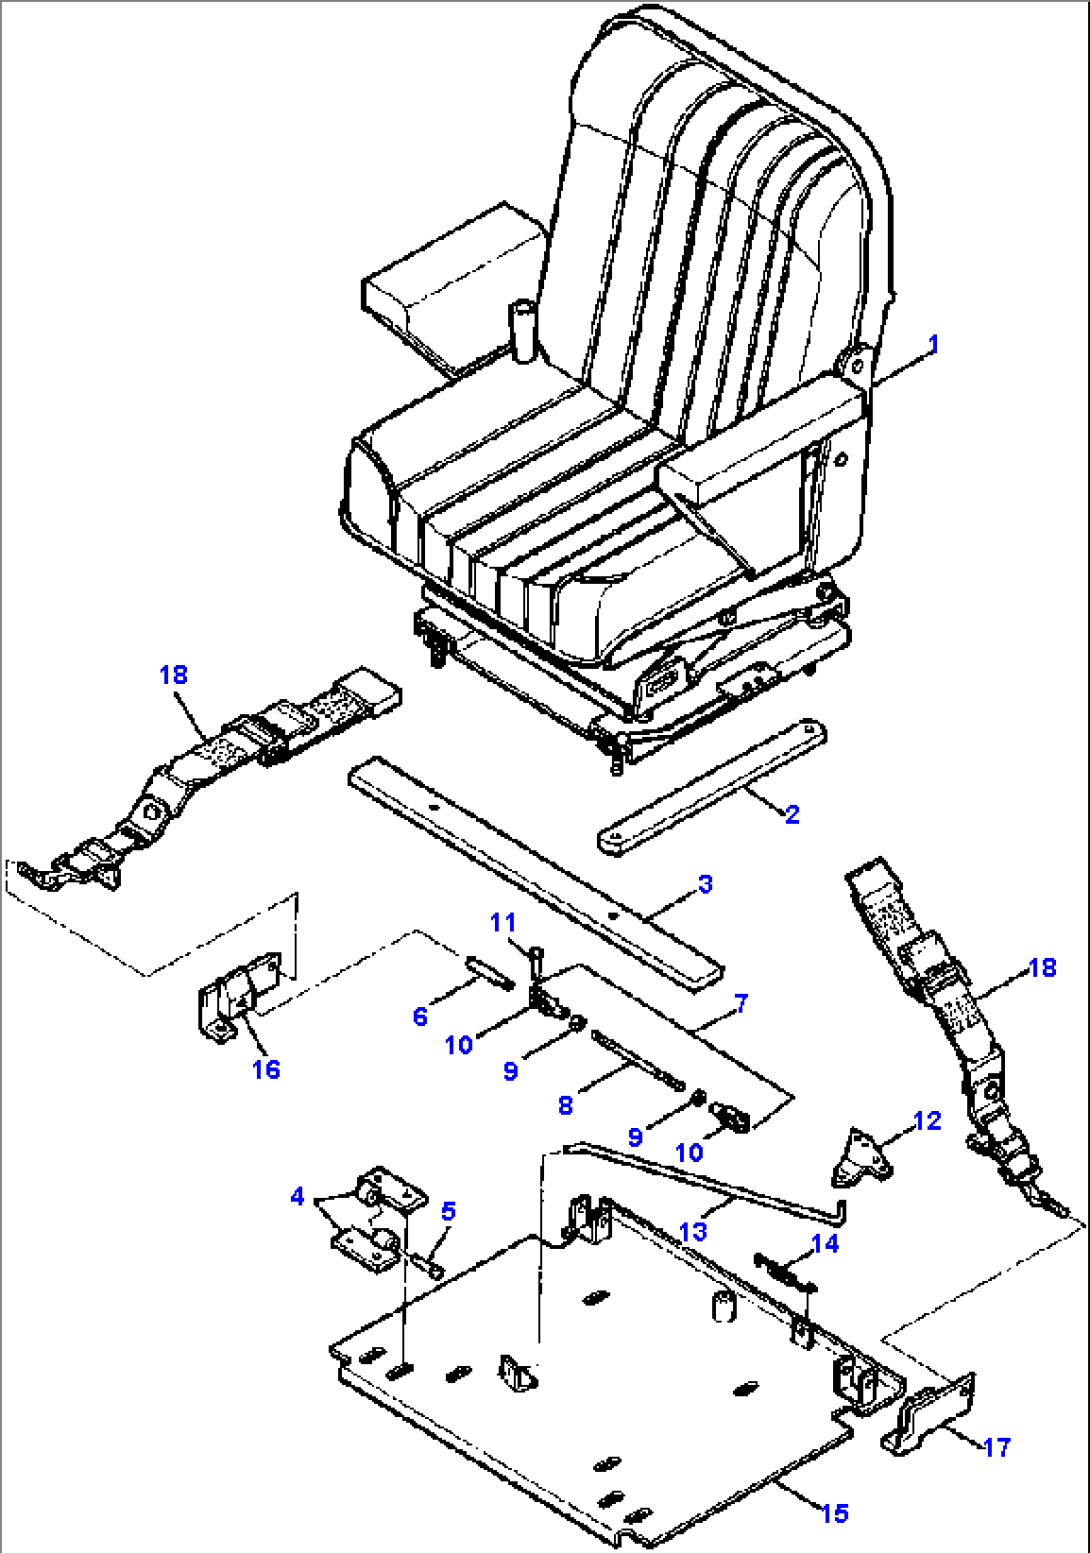 SUSPENDED SEAT MOUNTING